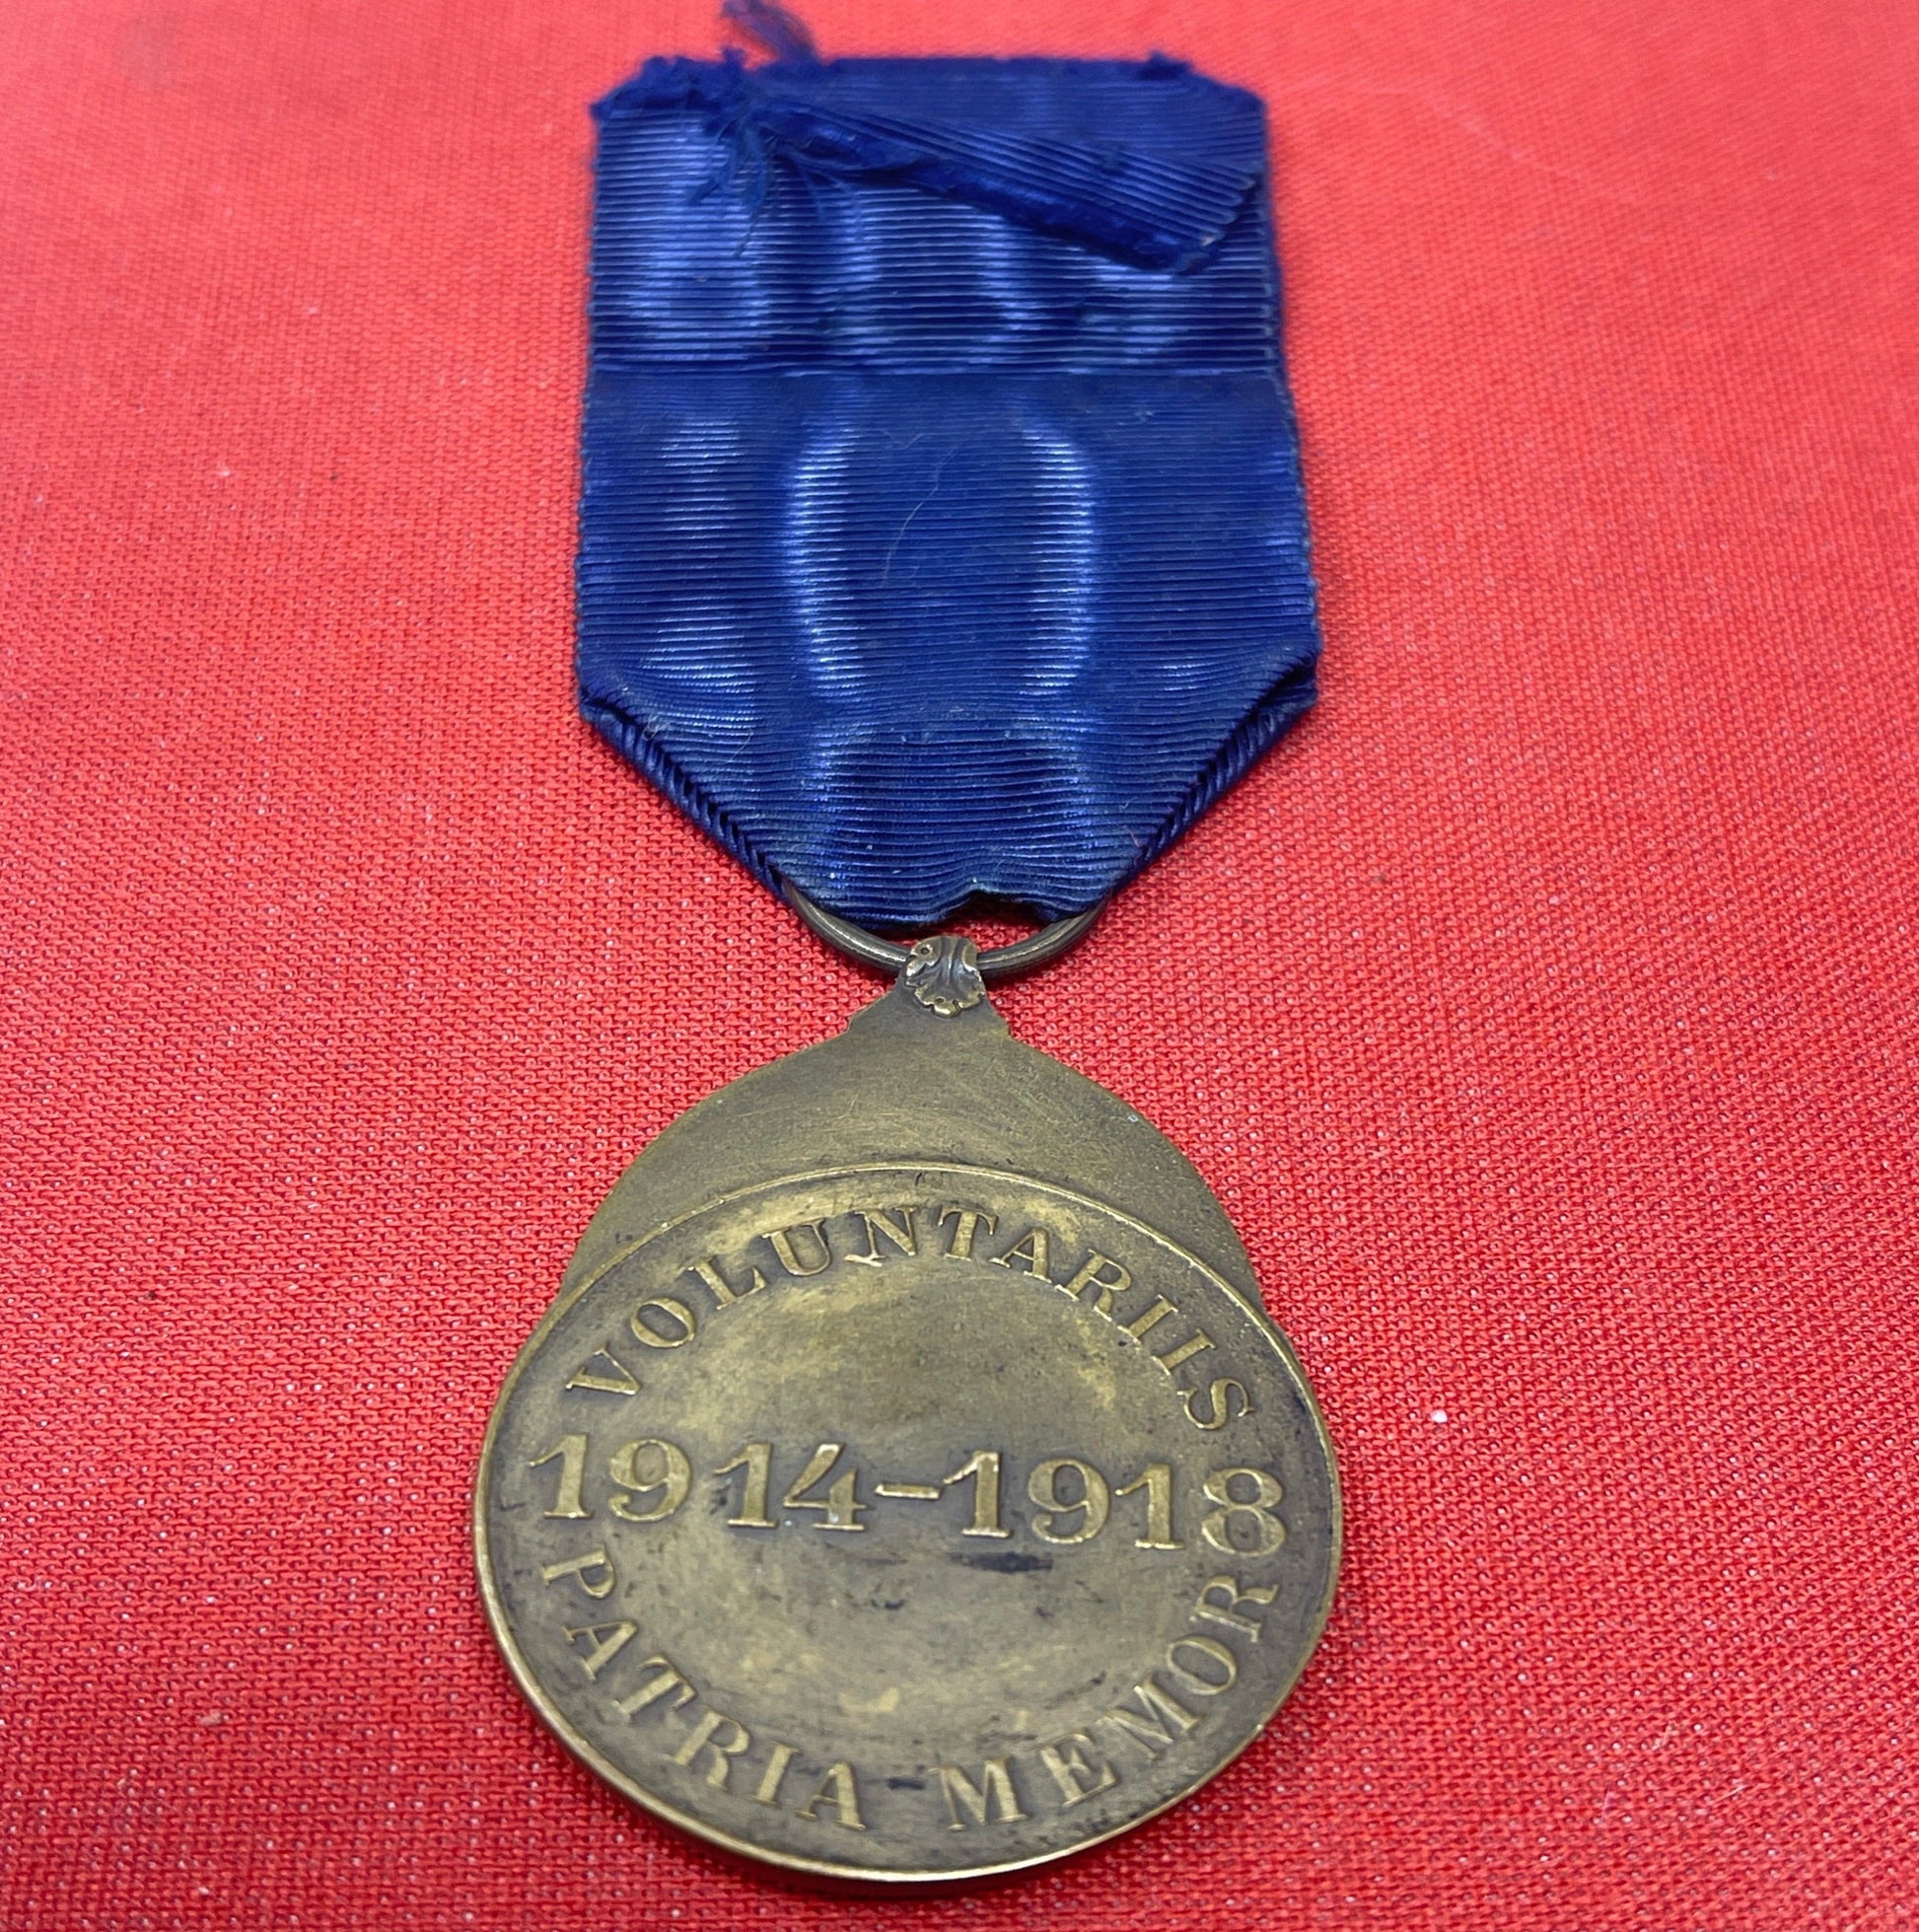 The Volunteer Combatant’s Medal 1914-1918